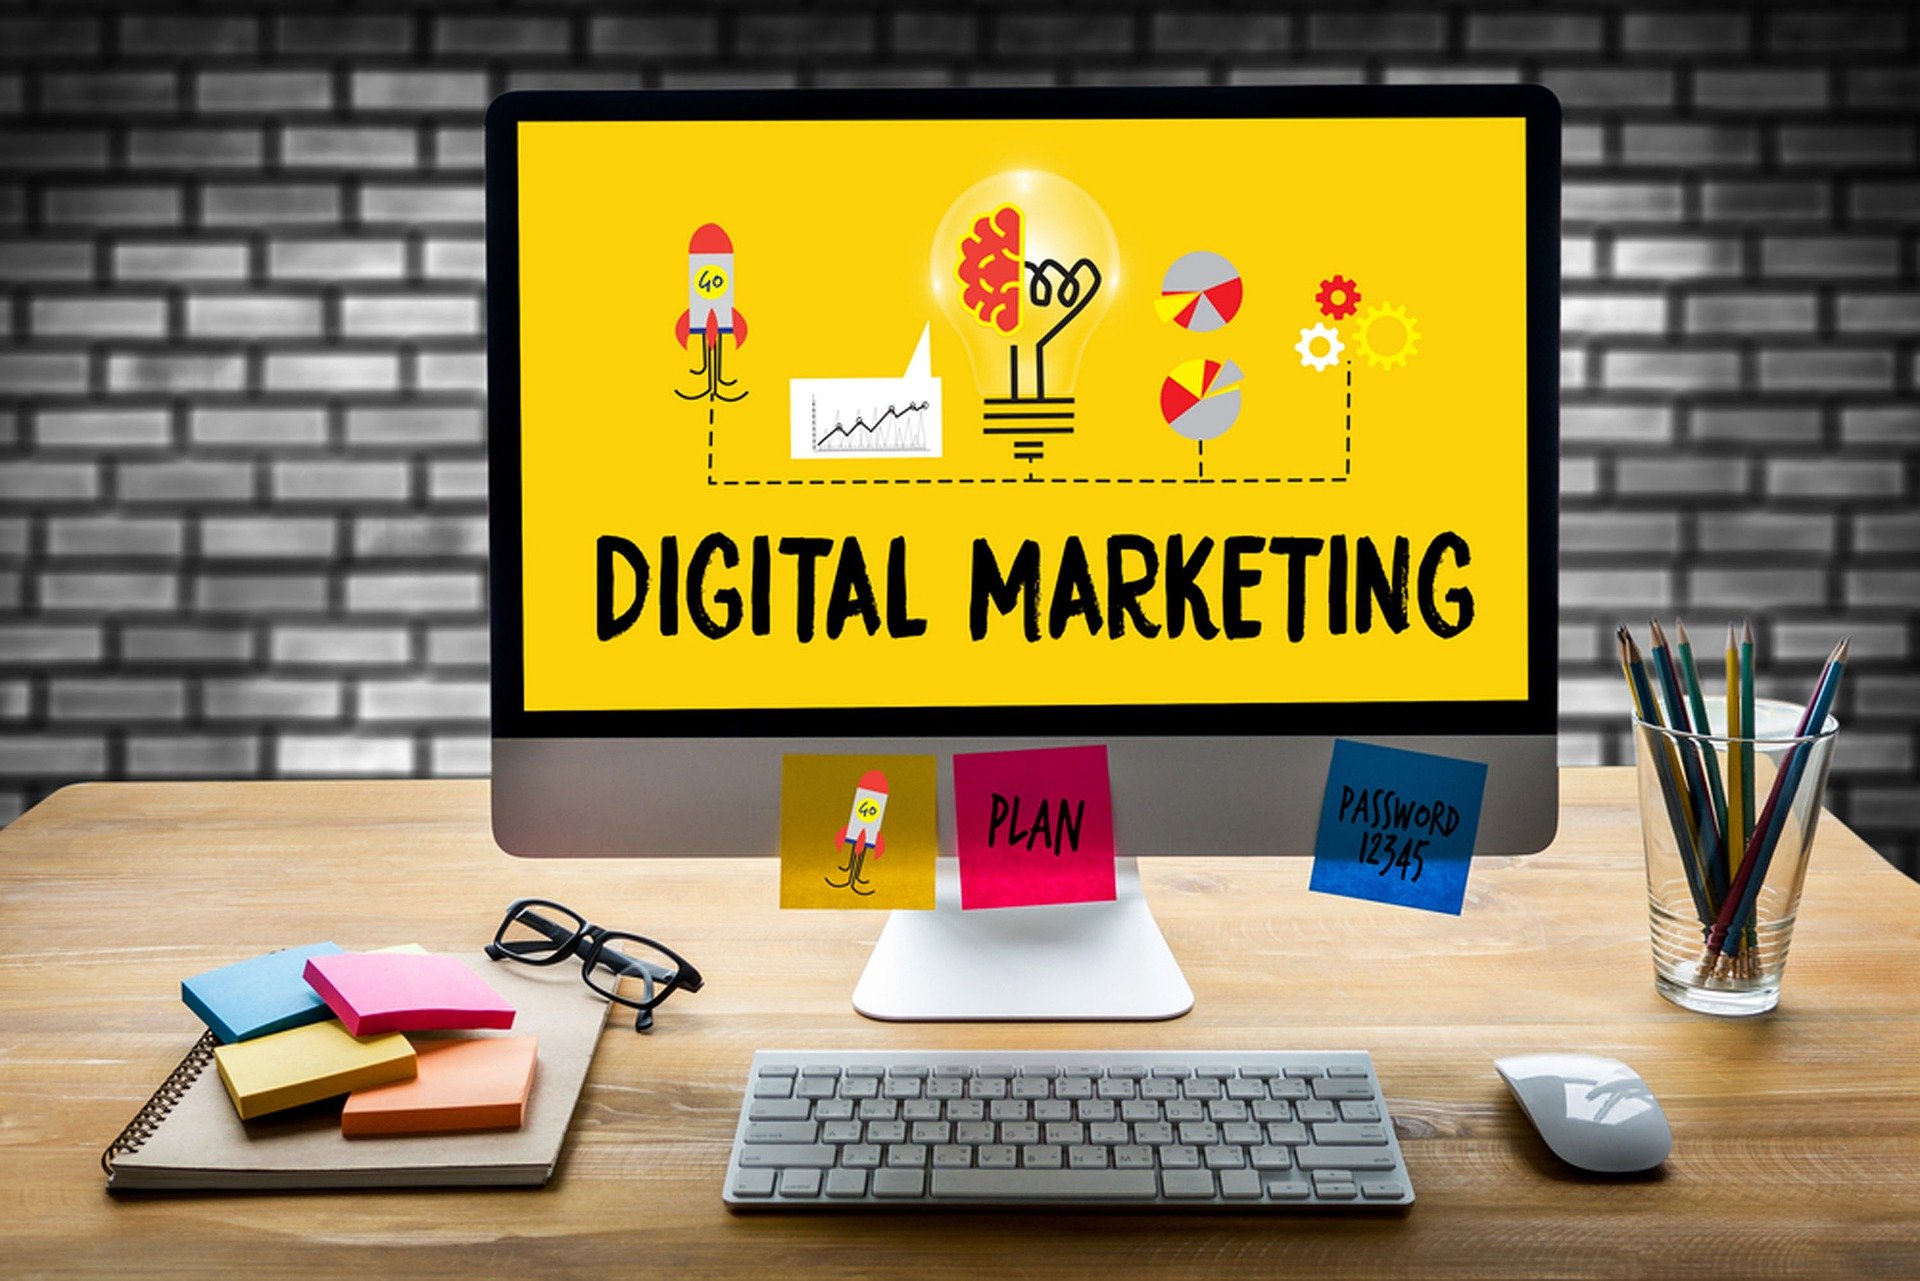 What to consider when choosing digital marketing tools